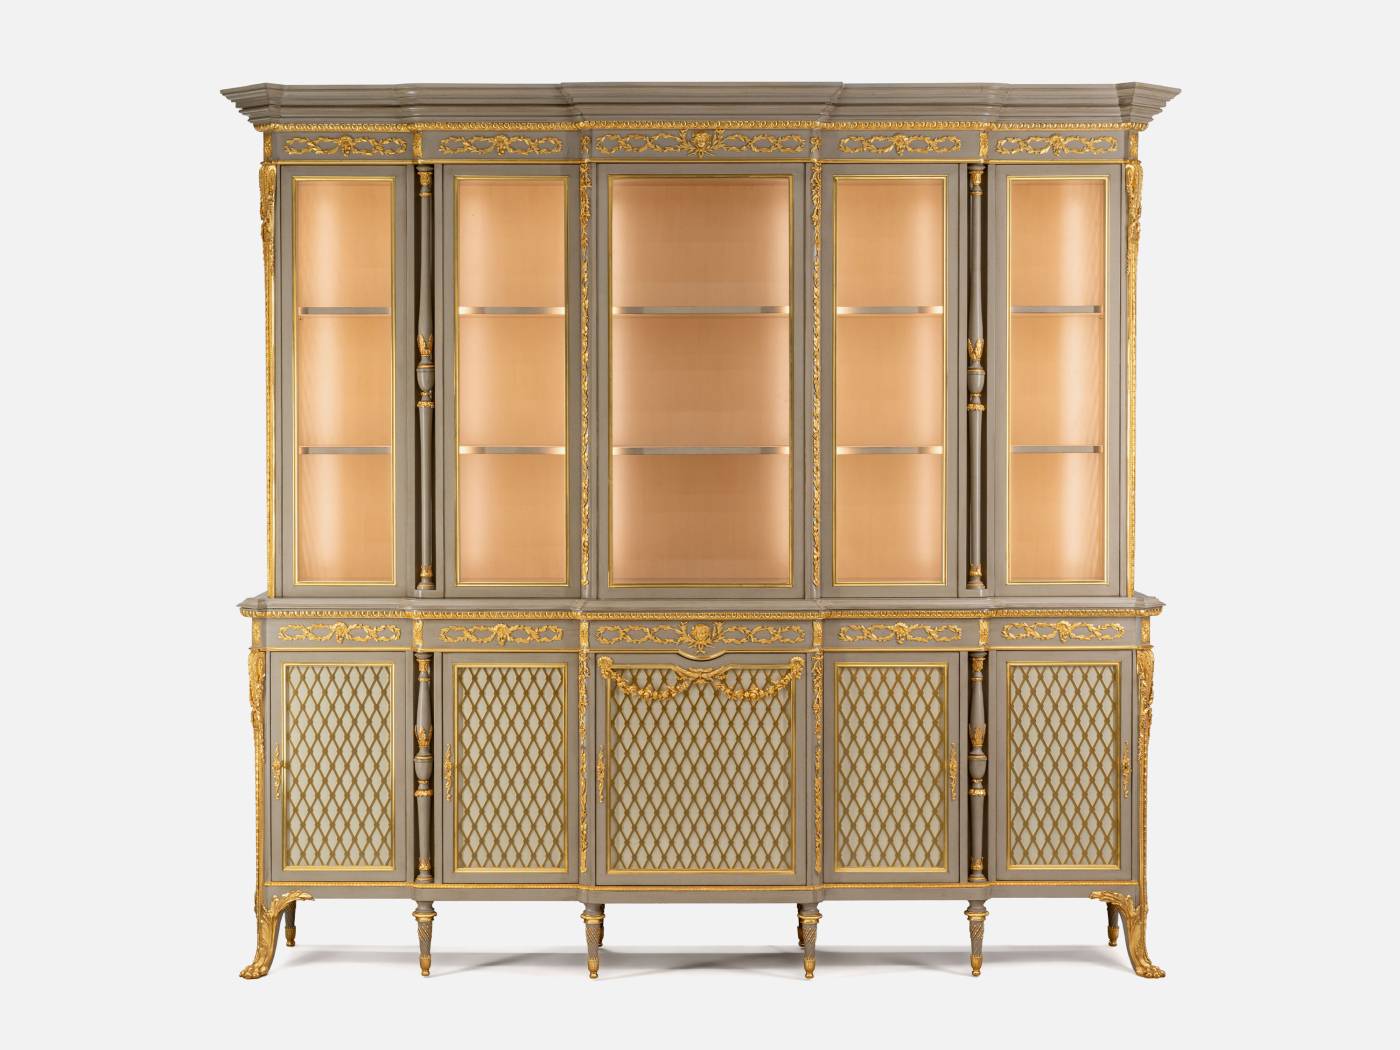 ART.567/V – The elegance of luxury classic Showcases and Bookcases made in Italy by C.G. Capelletti.